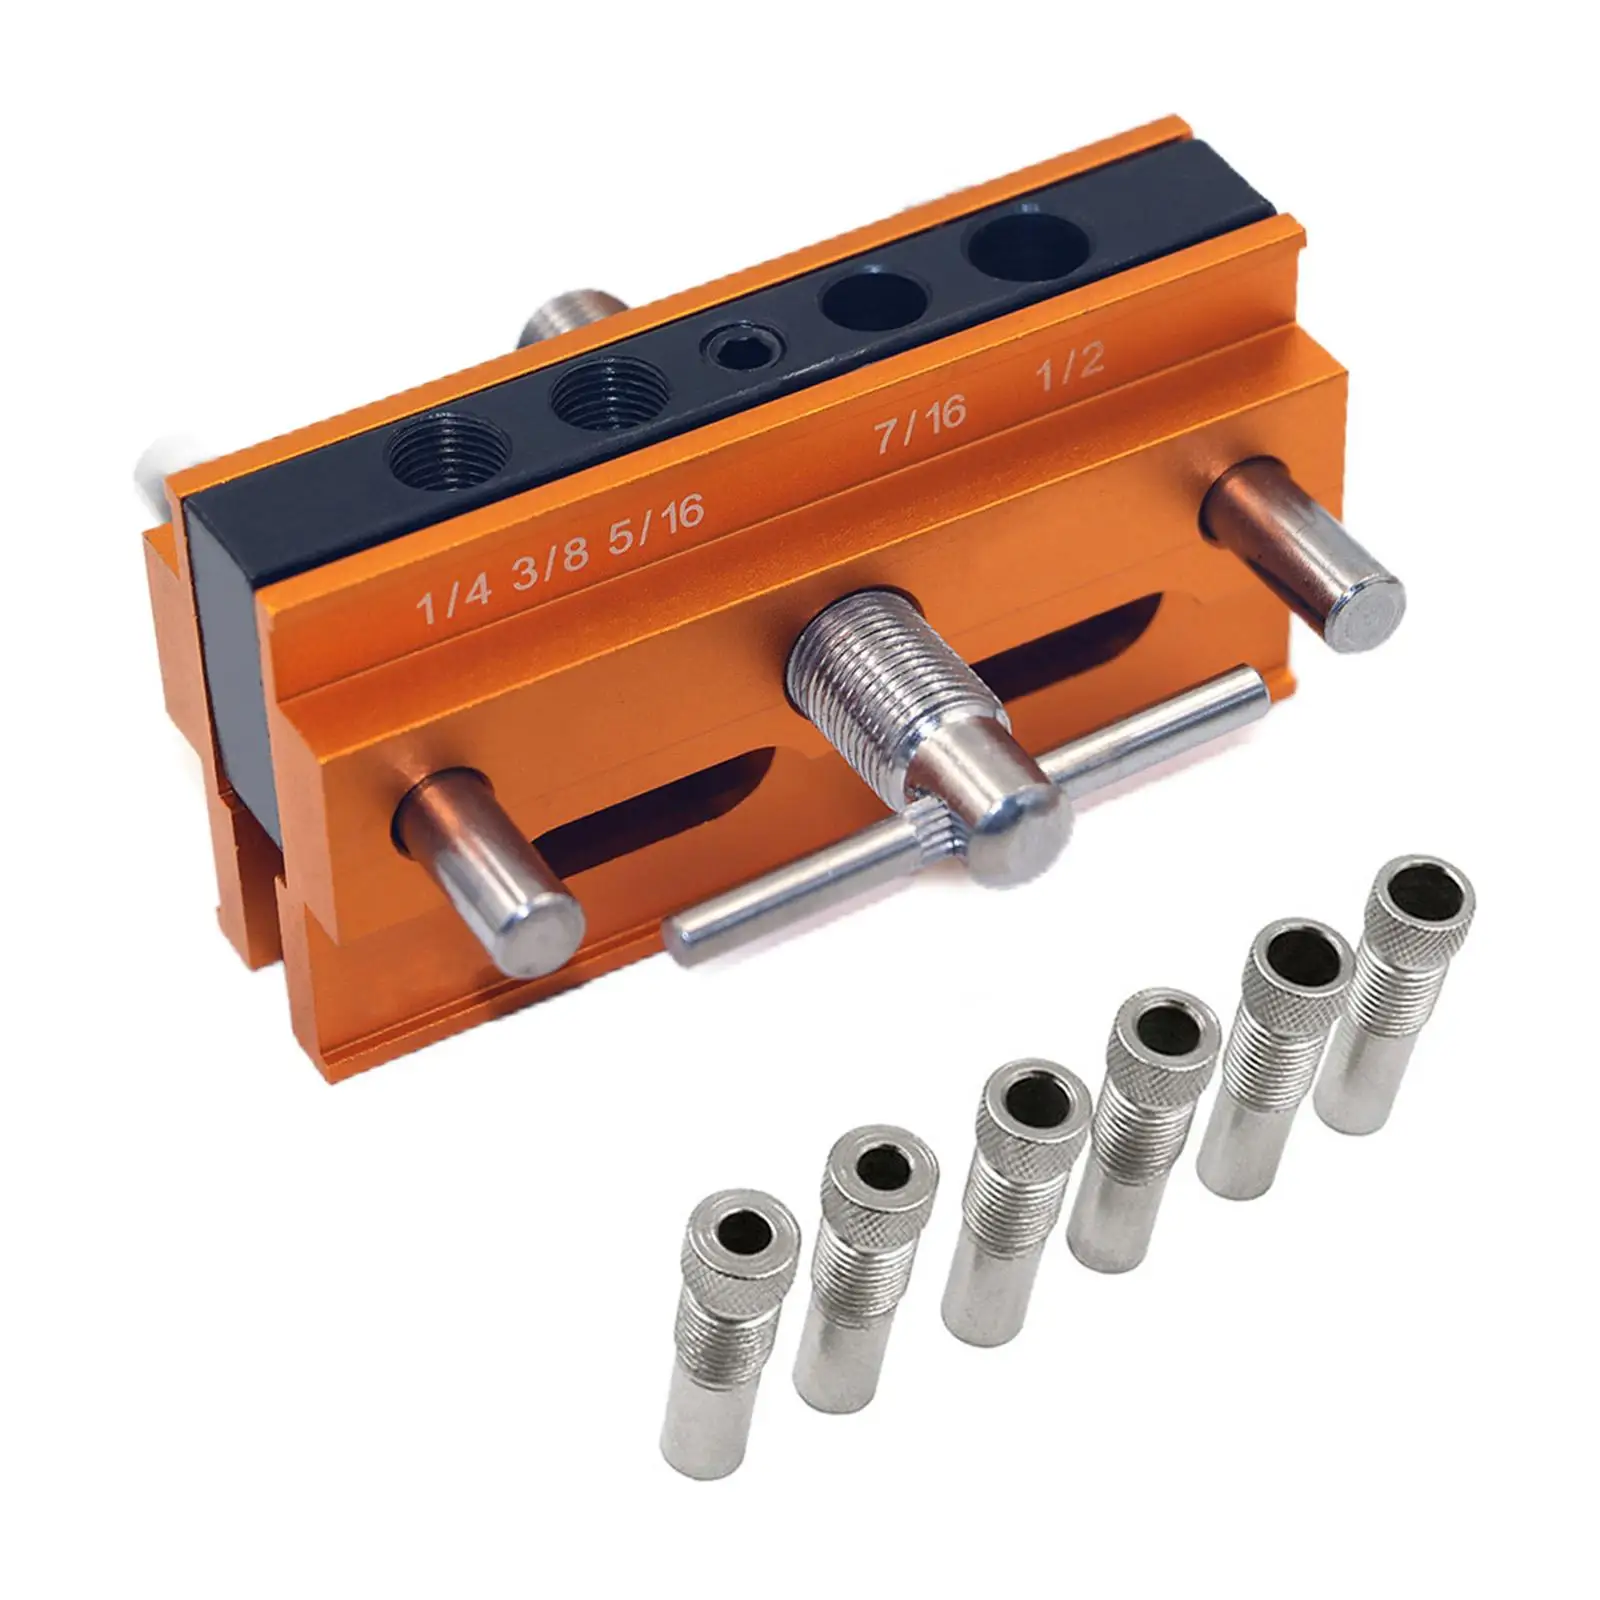 Heavy Duty Doweling Jig Self Centering with Drill Bushings Tool Drilling Kit Precise Drilling Guide for Metric Dowels Joinery